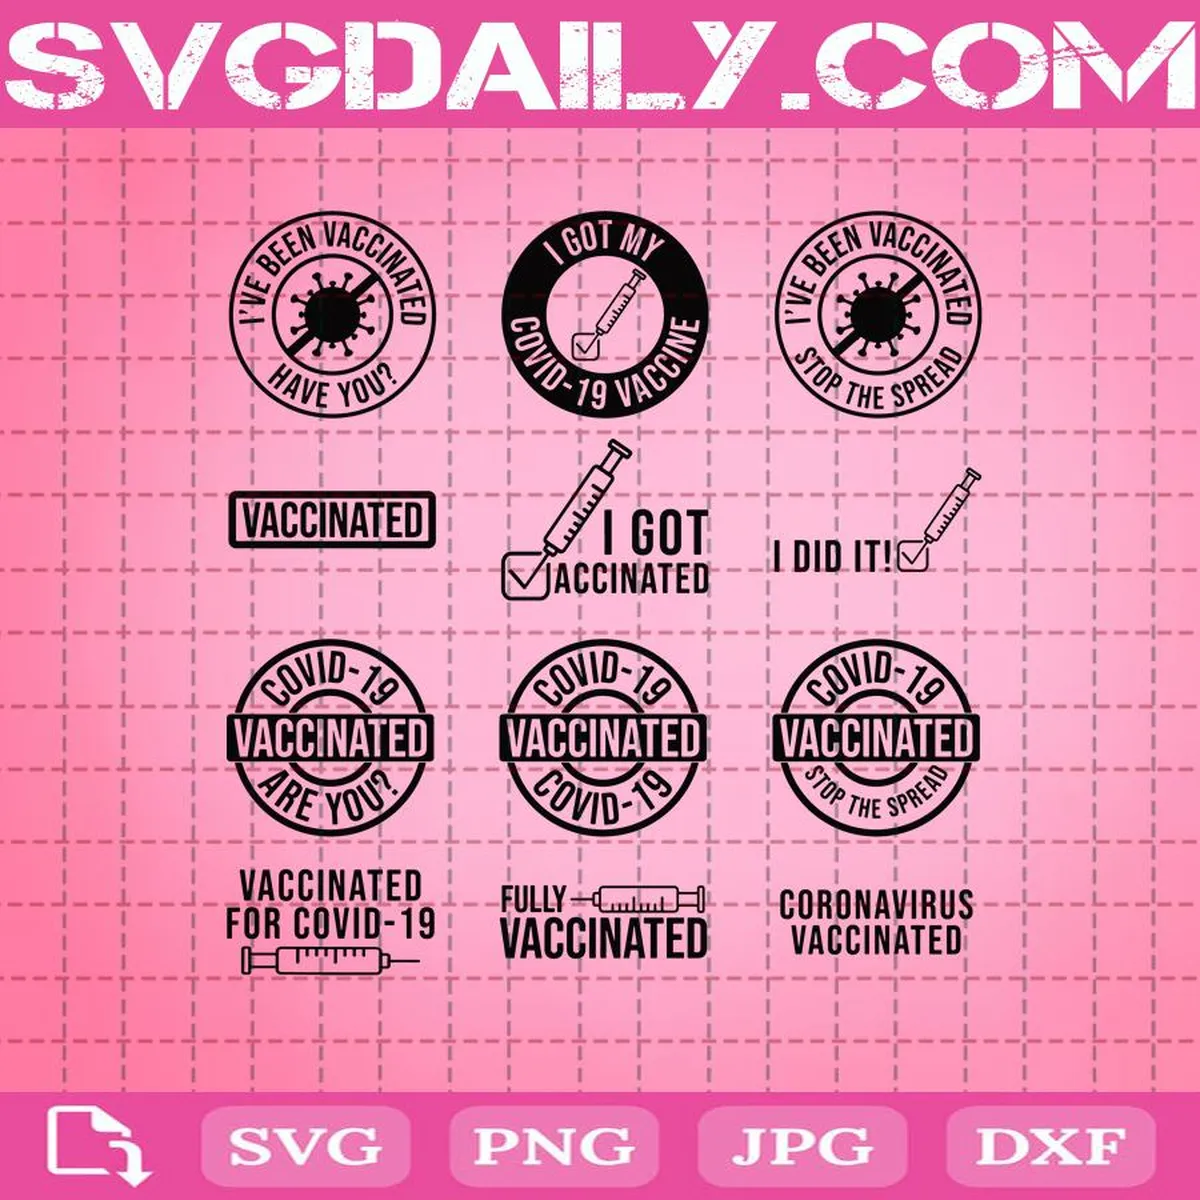 2021 Vaccine Vaccinated For Covid-19 Svg Bundle, Vaccine Svg Bundle, Quarantine Svg, Covid-19 Svg, Vaccine Svg, Vaccinated Svg